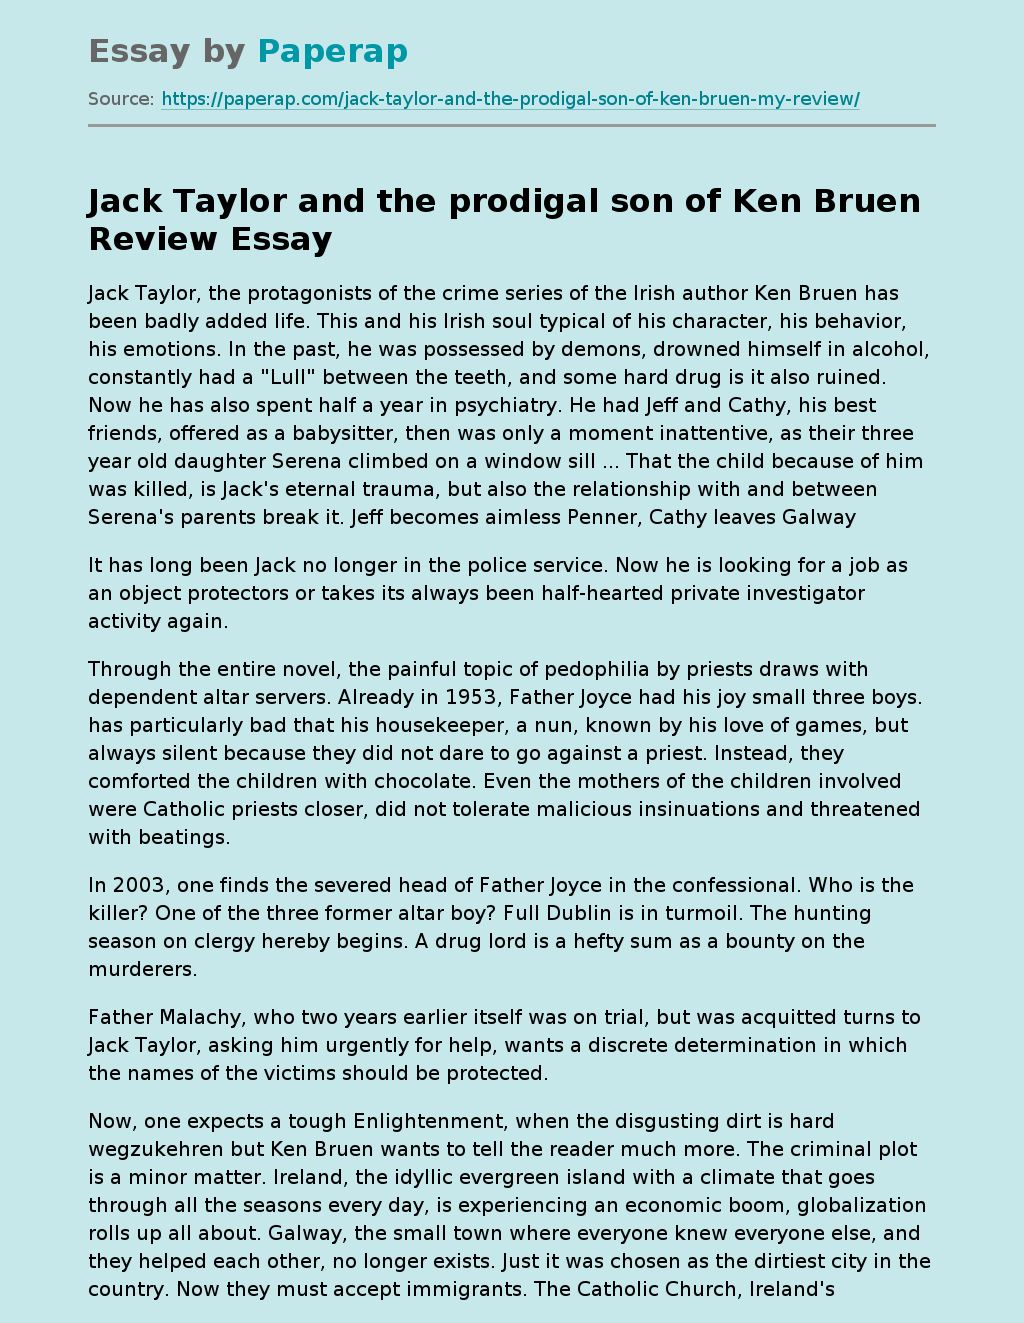 Jack Taylor and the prodigal son of Ken Bruen Review